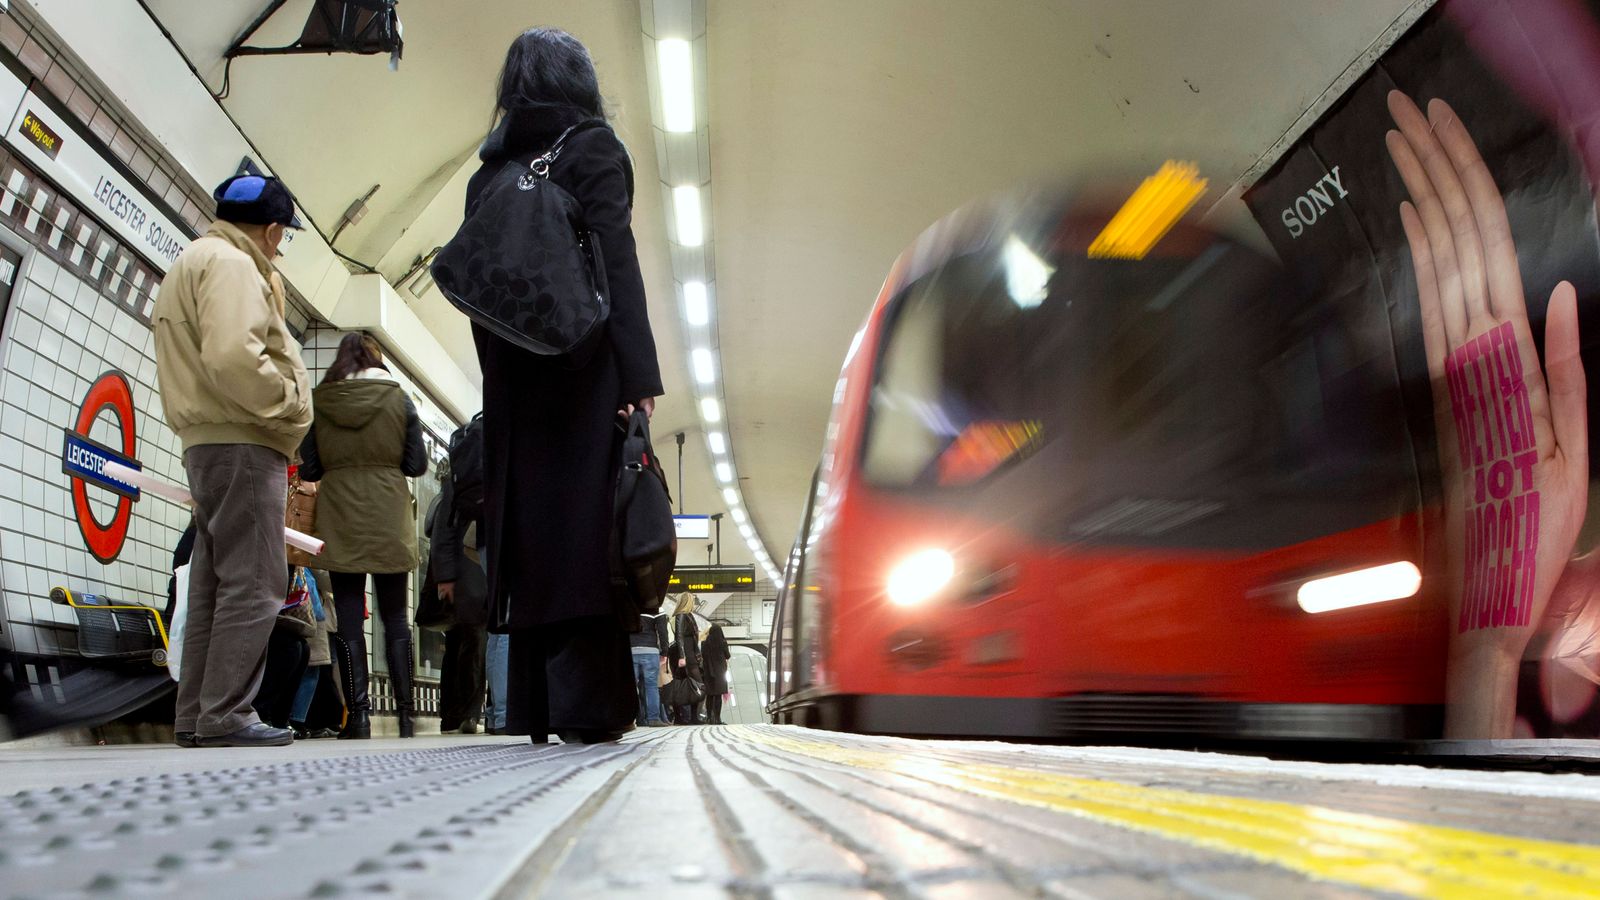 London's Tube and train fares to be cut on Fridays to lure people back to the city